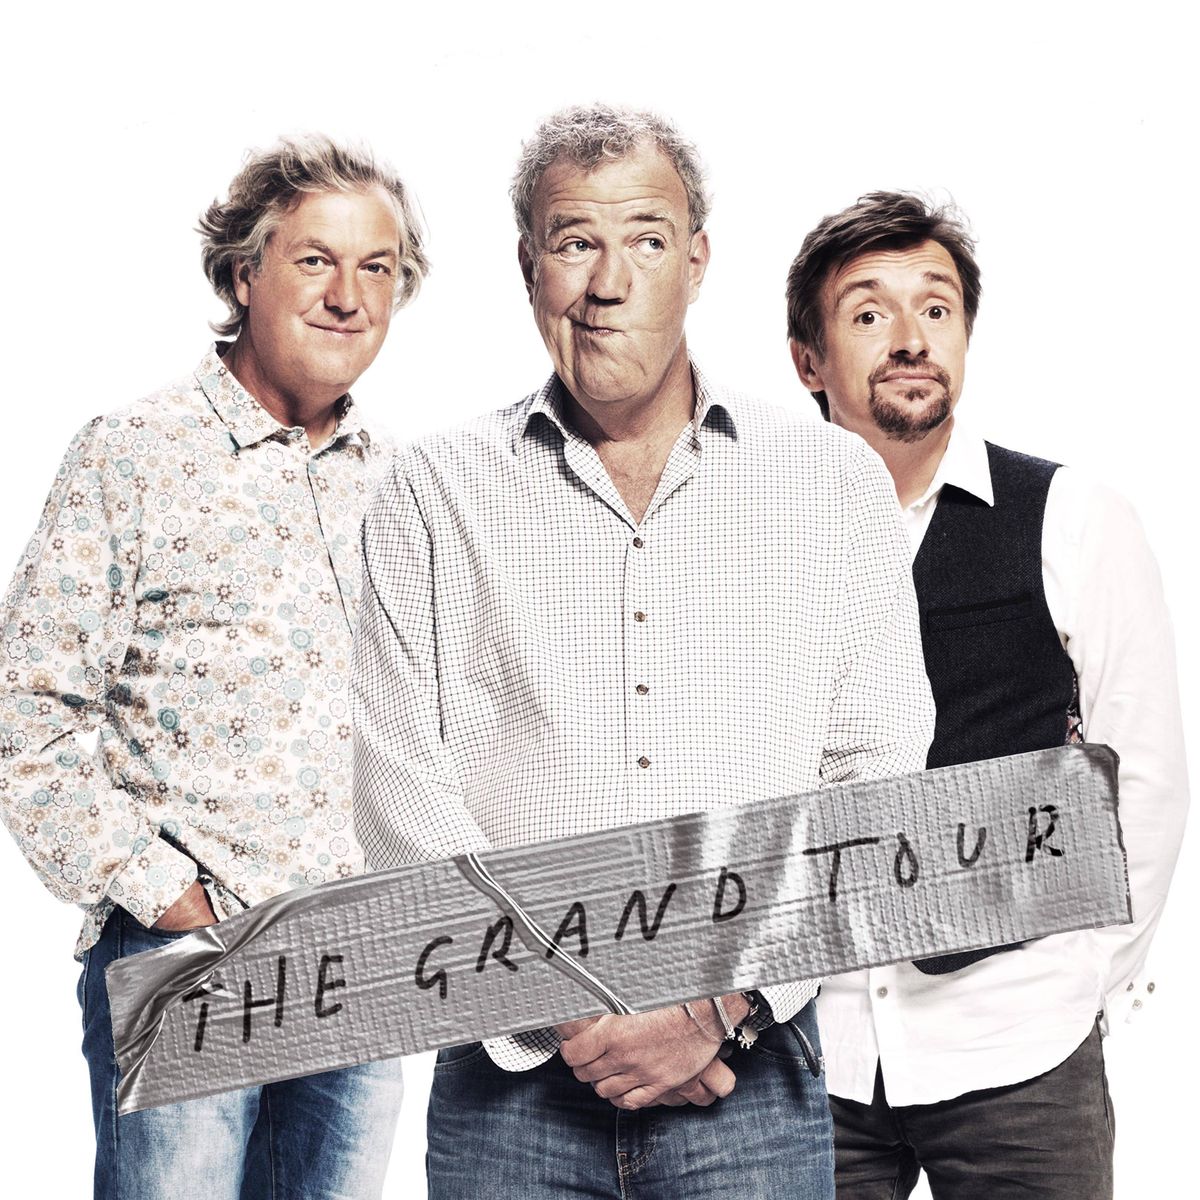 Prime Video's The Grand Tour Is Coming to an End